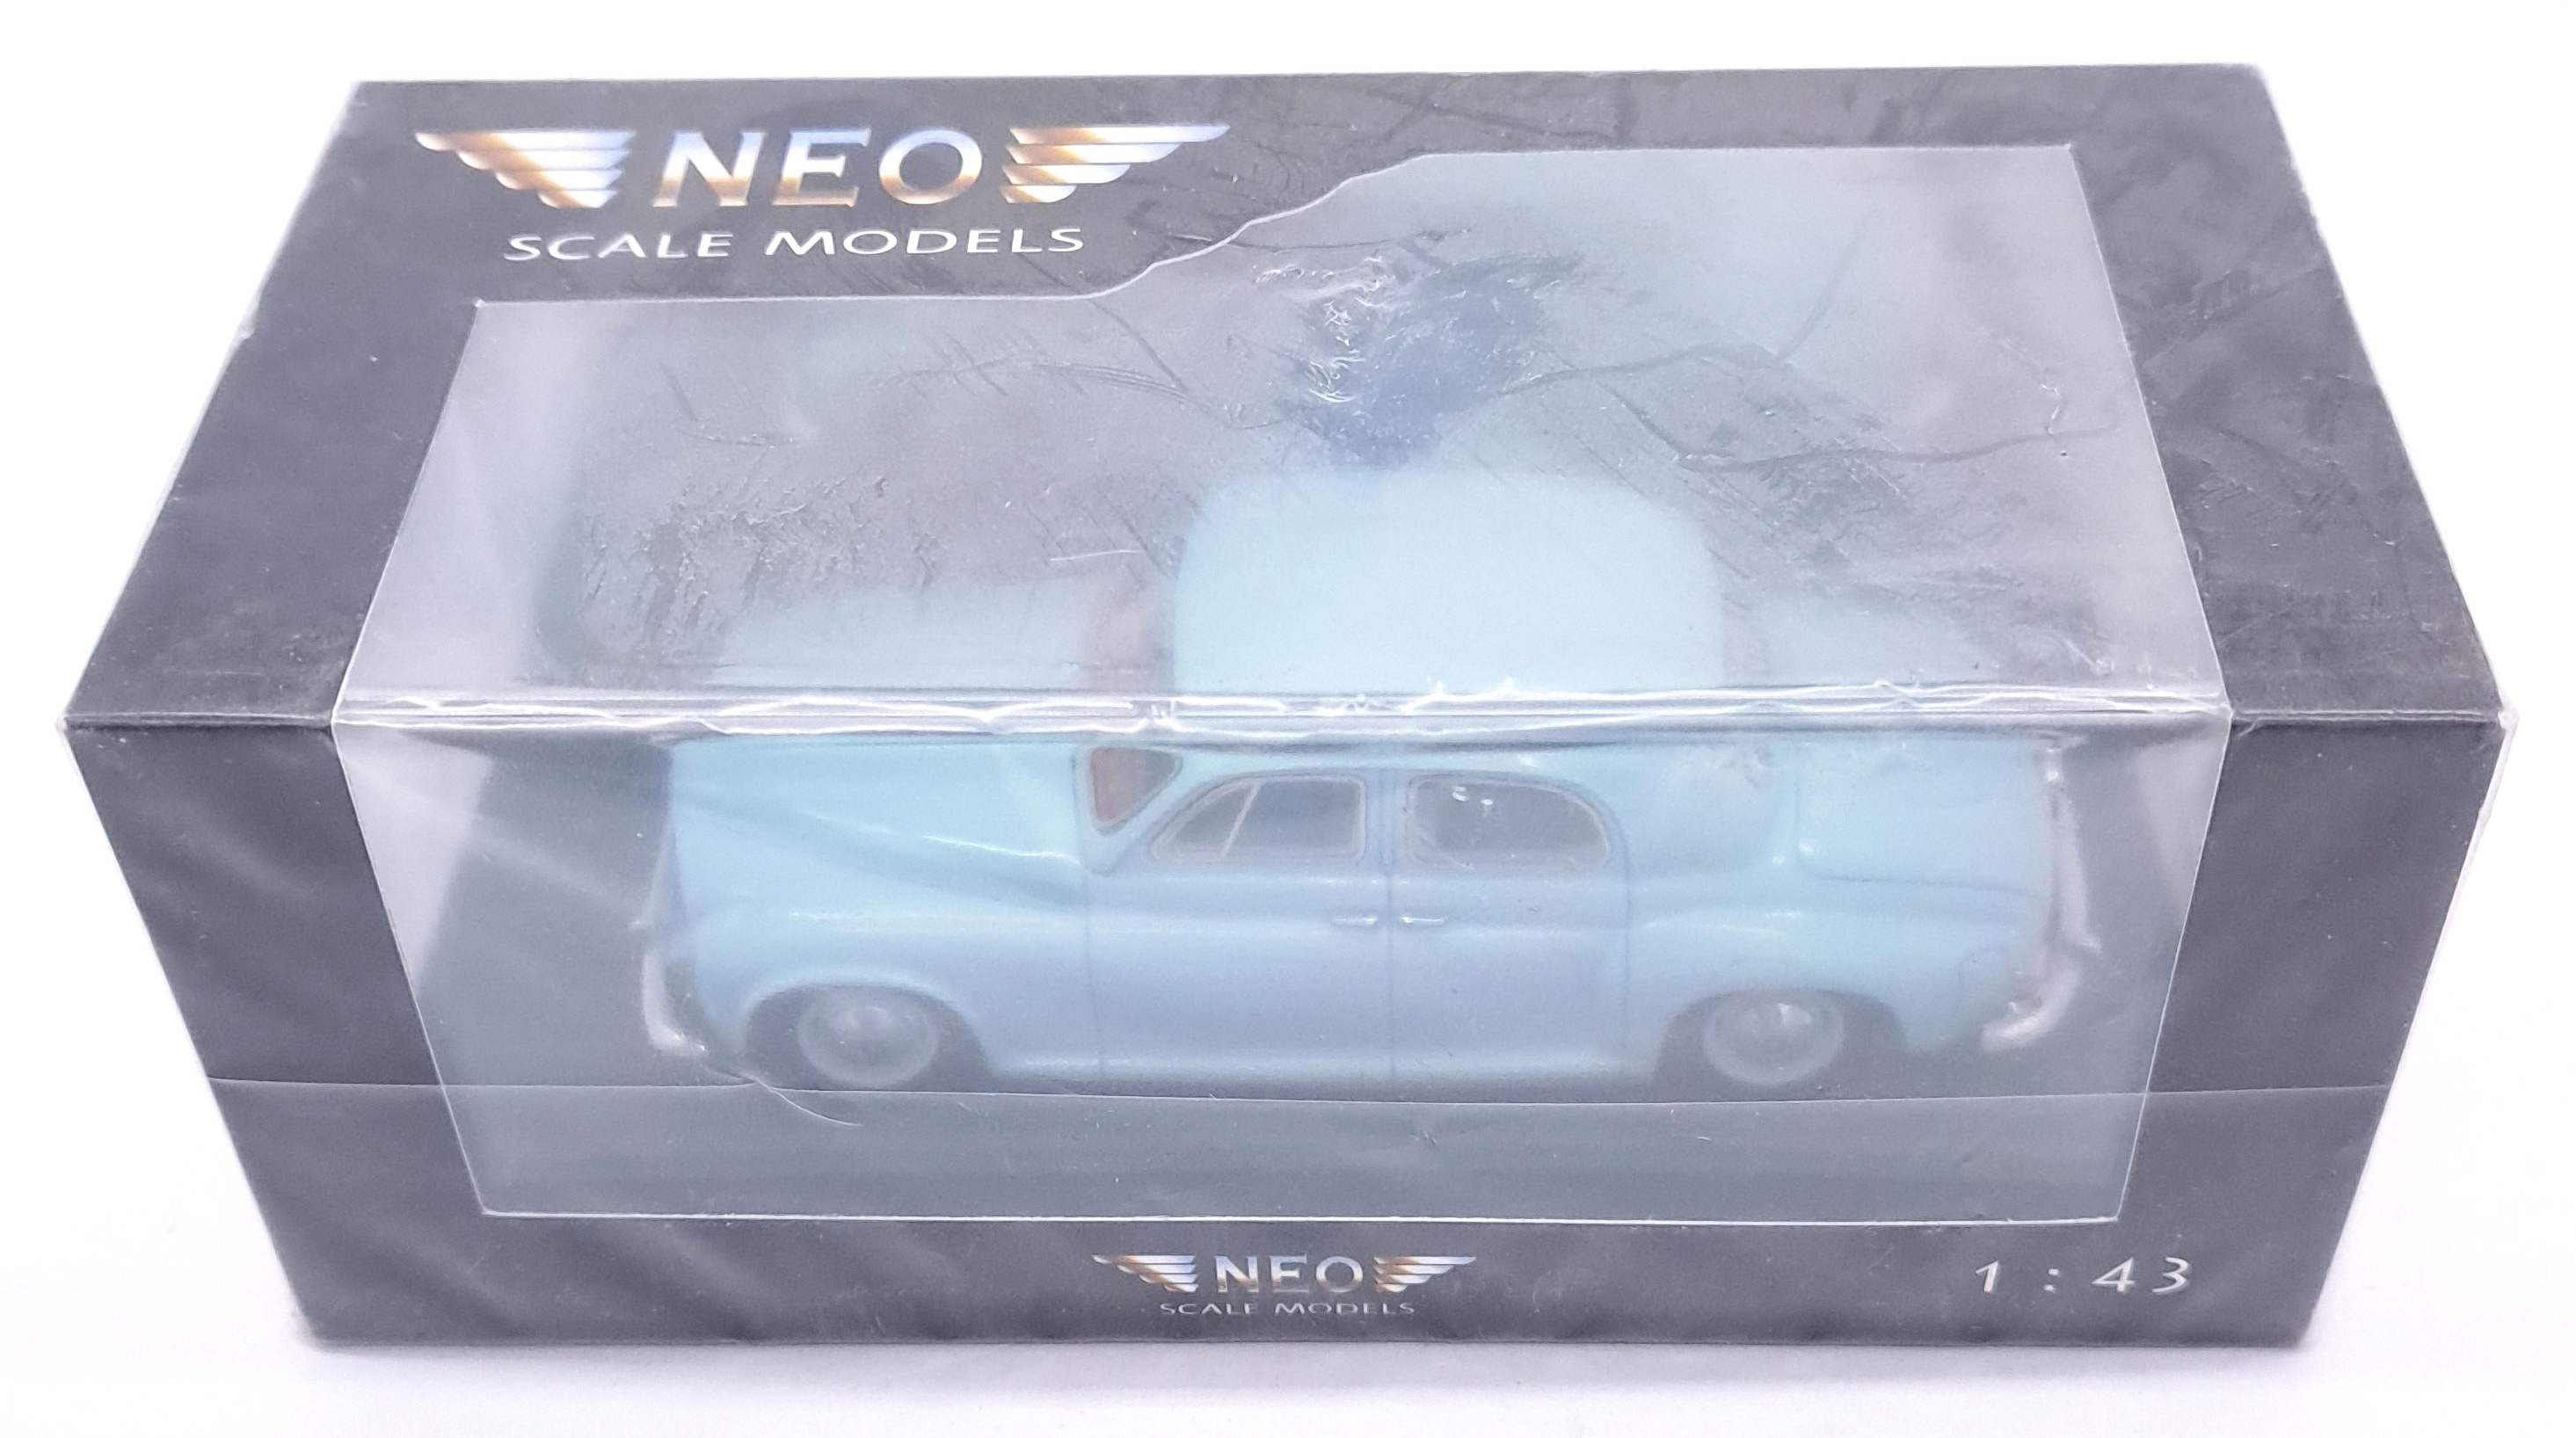 NEO Scale Models, a boxed 1:43 scale group - Image 2 of 4